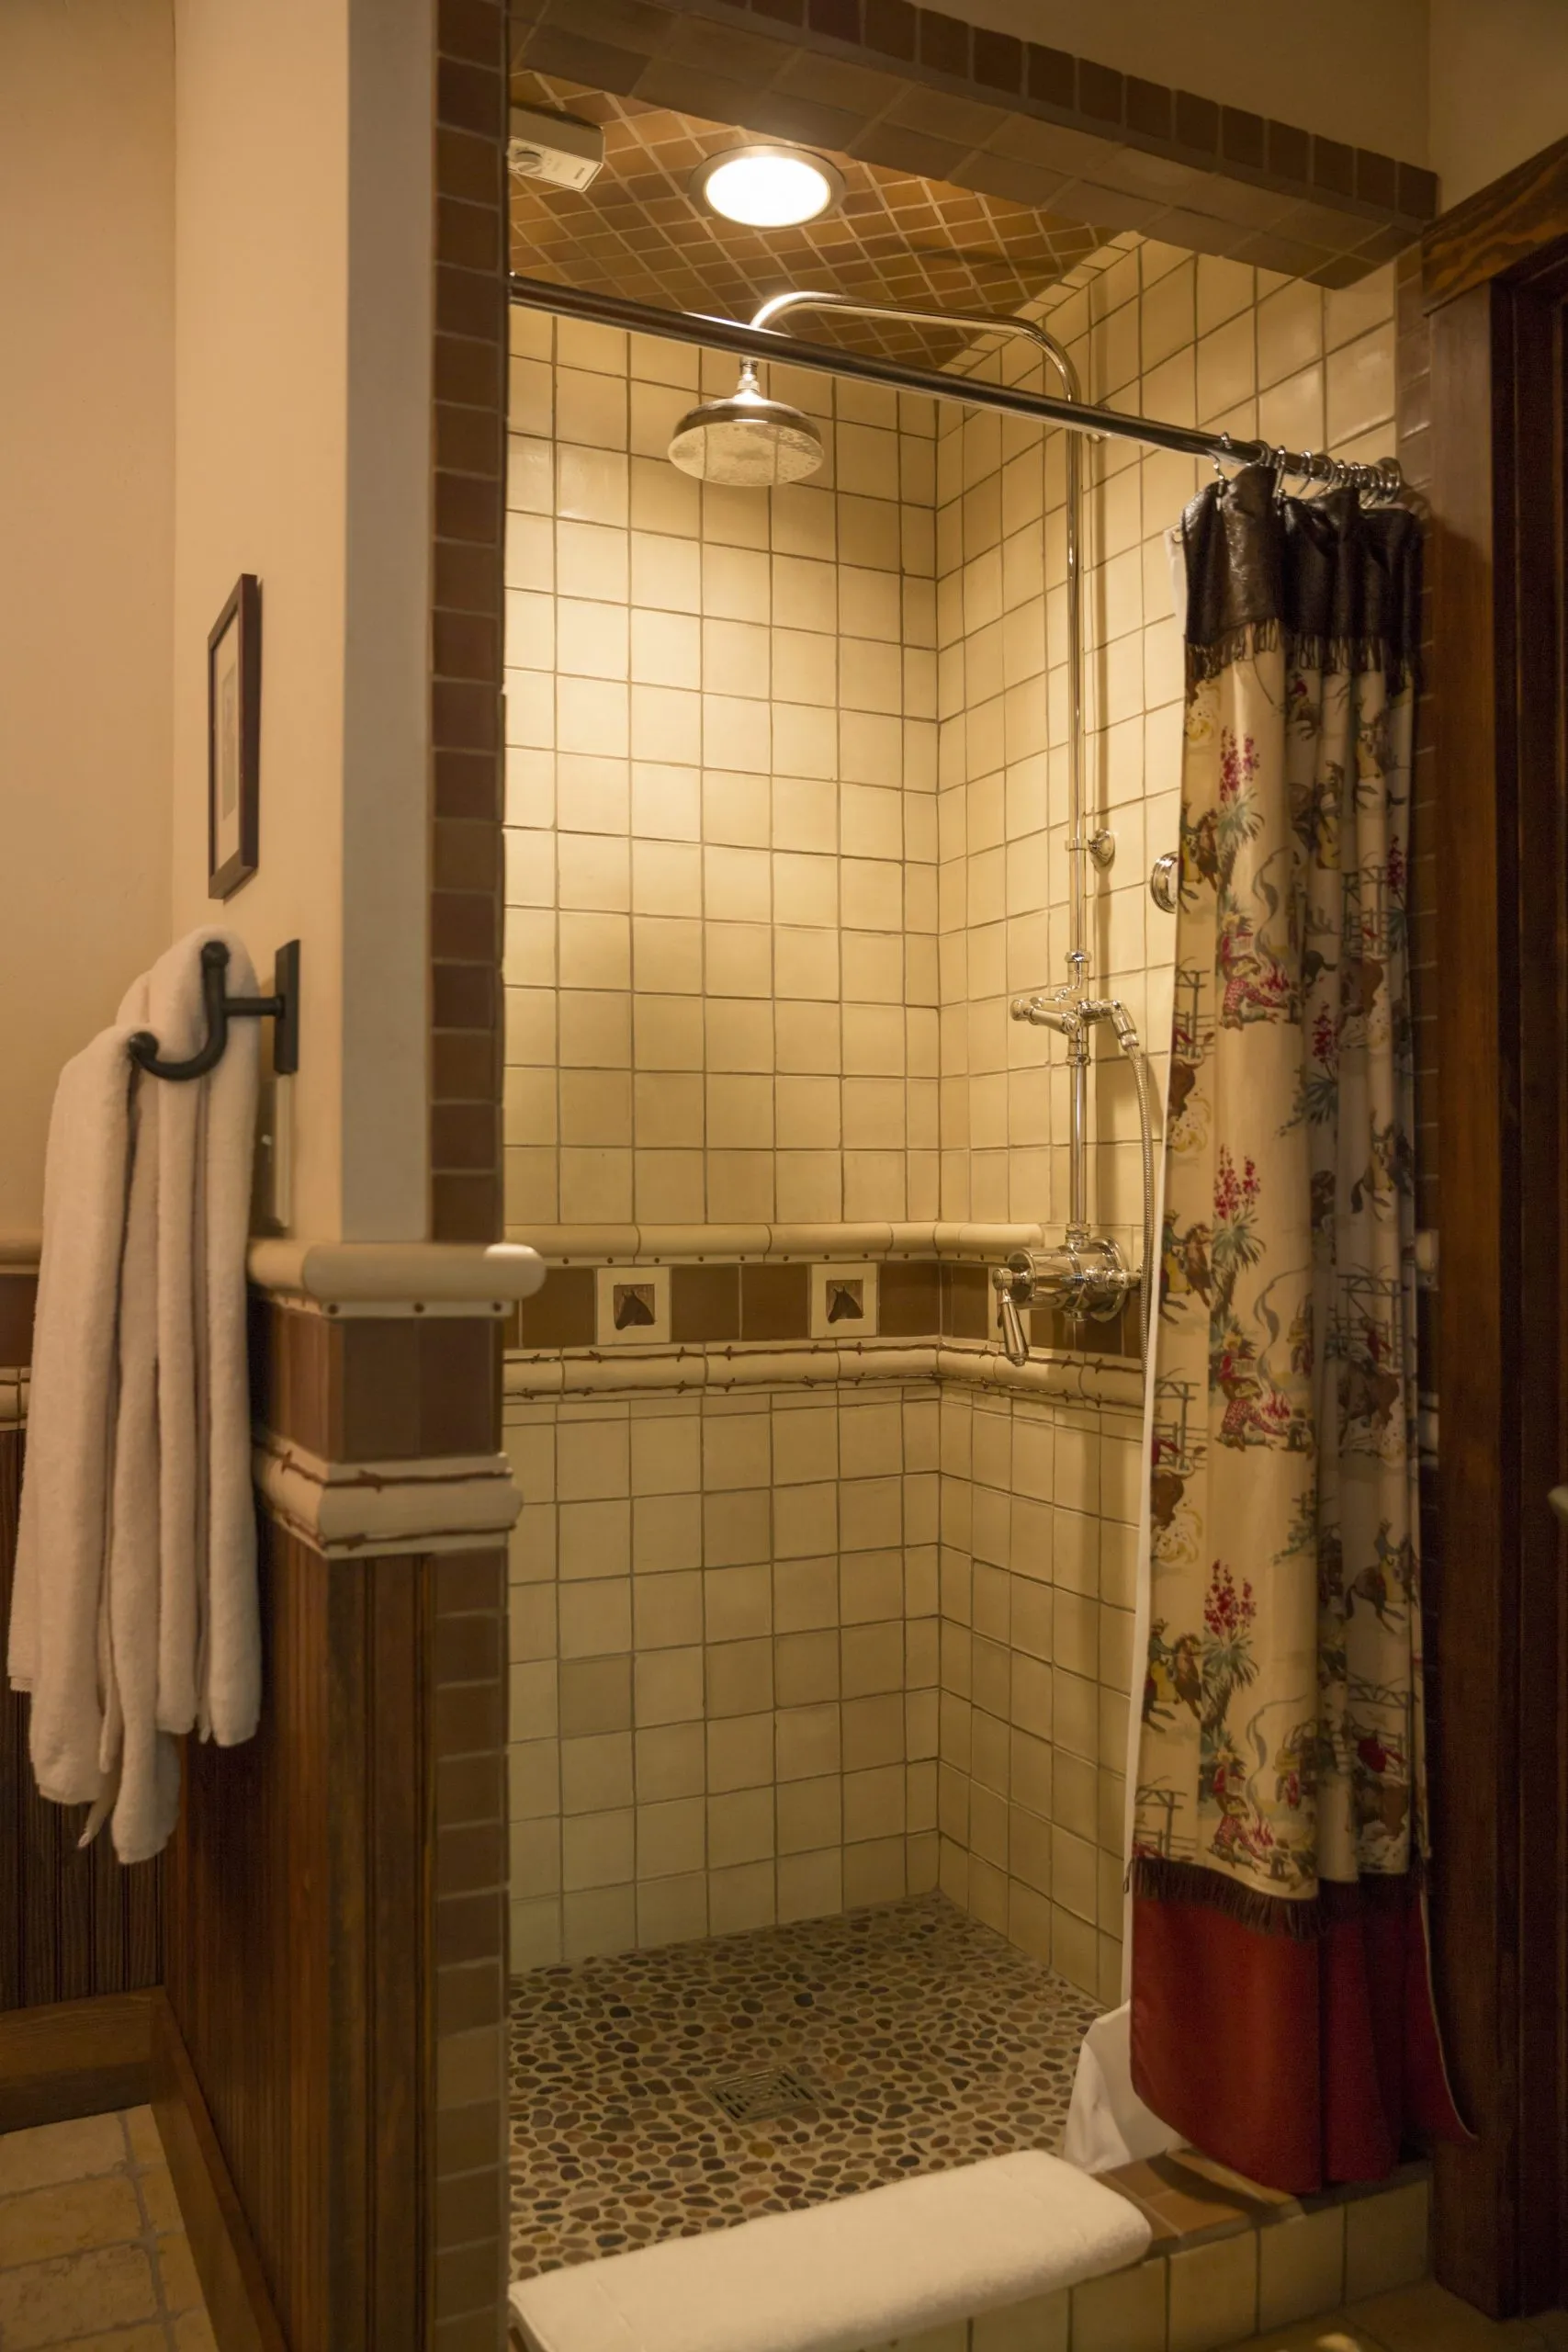 Tiled shower with a rainfall shower head and open curtain